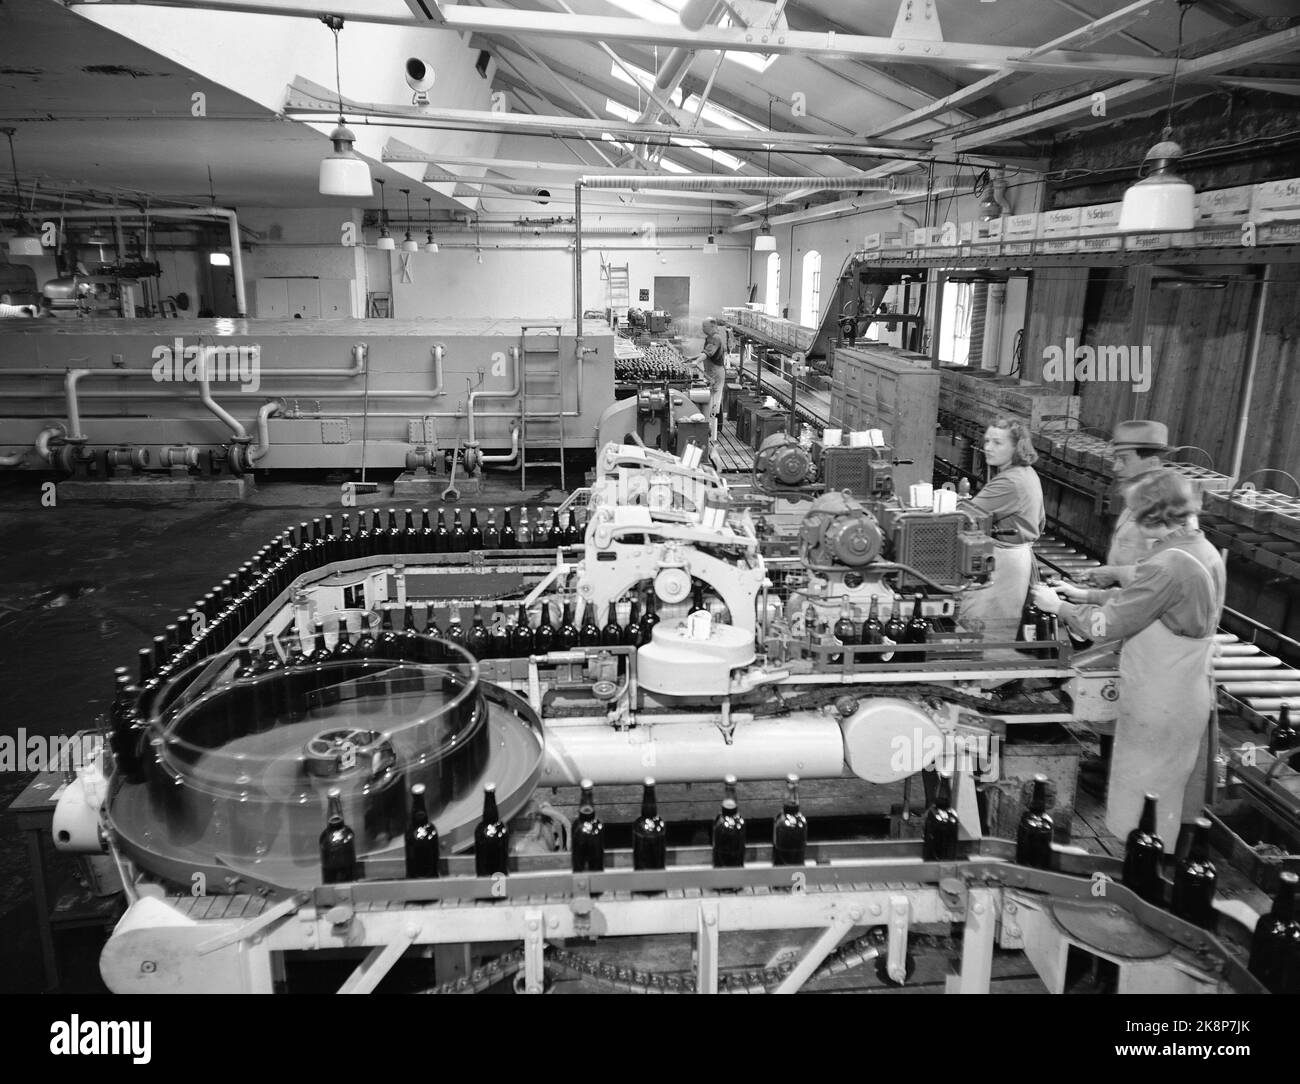 Oslo 1951. Breweries in Oslo in 1951. Here from one of the work processes where labels are attached to the beer bottles. The machine is operated by ladies. Photo: Sverre A. Børretzen / Current / NTB Stock Photo